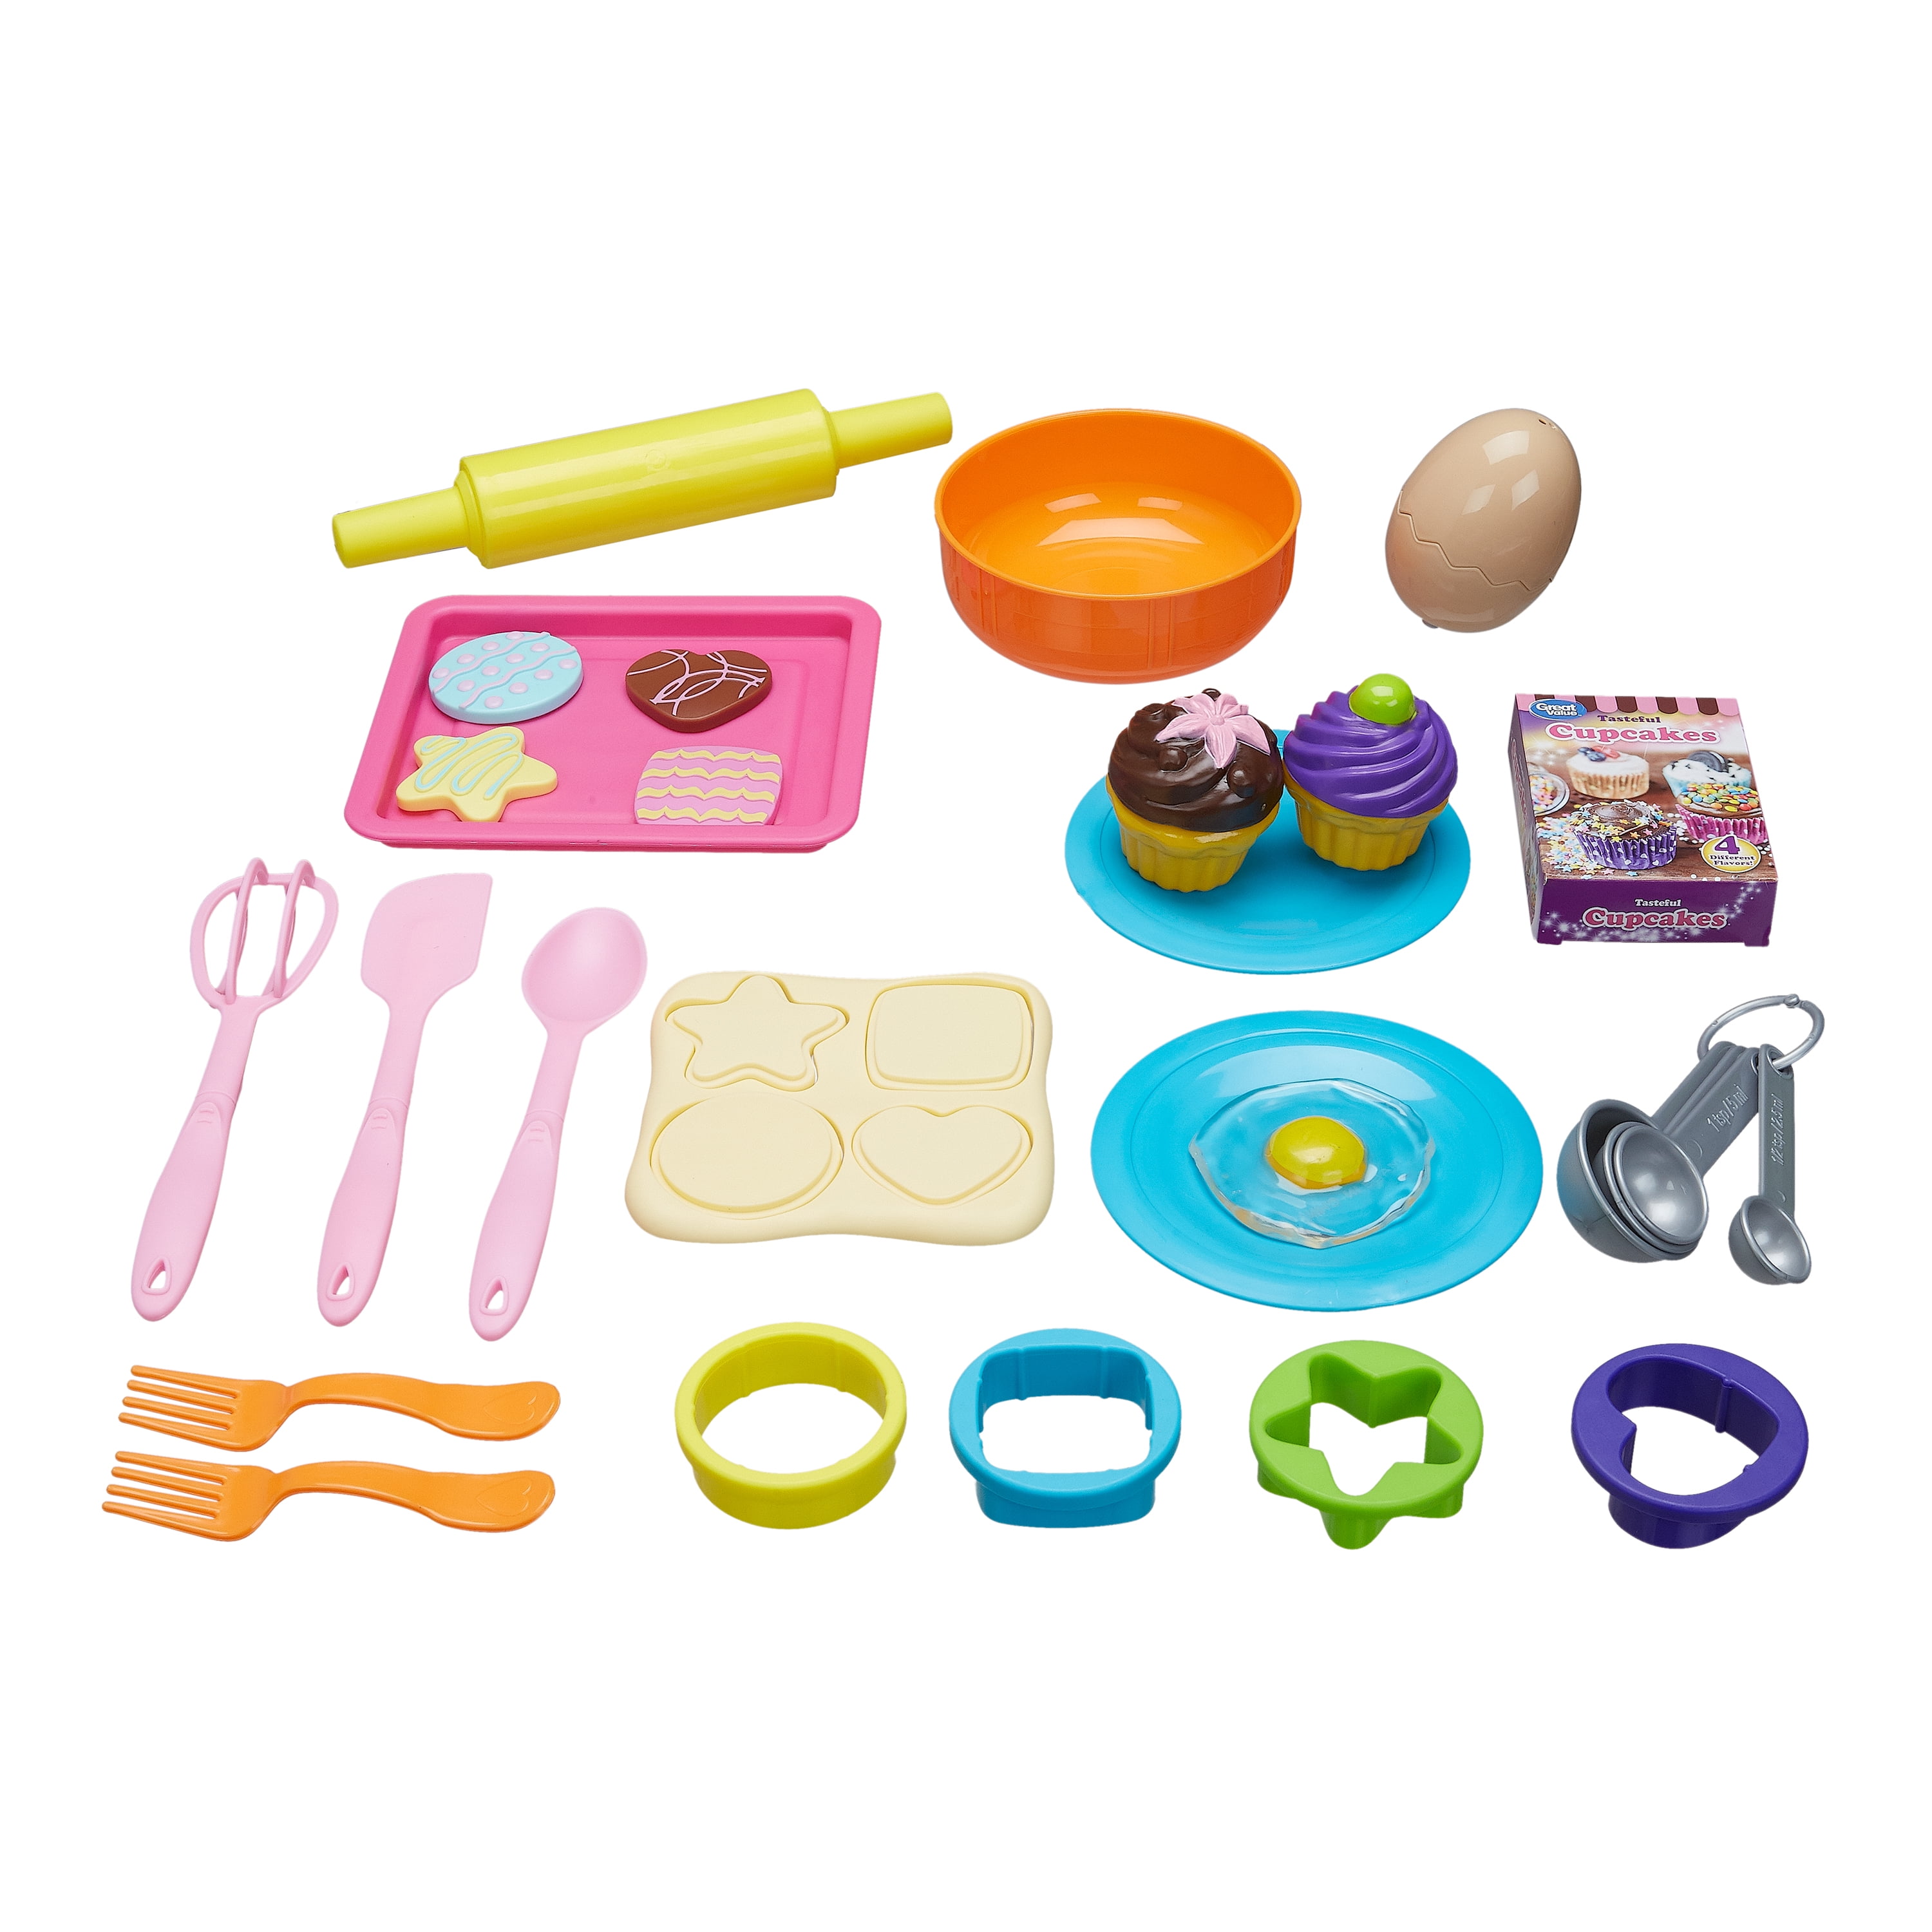 SPARK Create Imagine Cookie Dough and Cutters Baking Set 